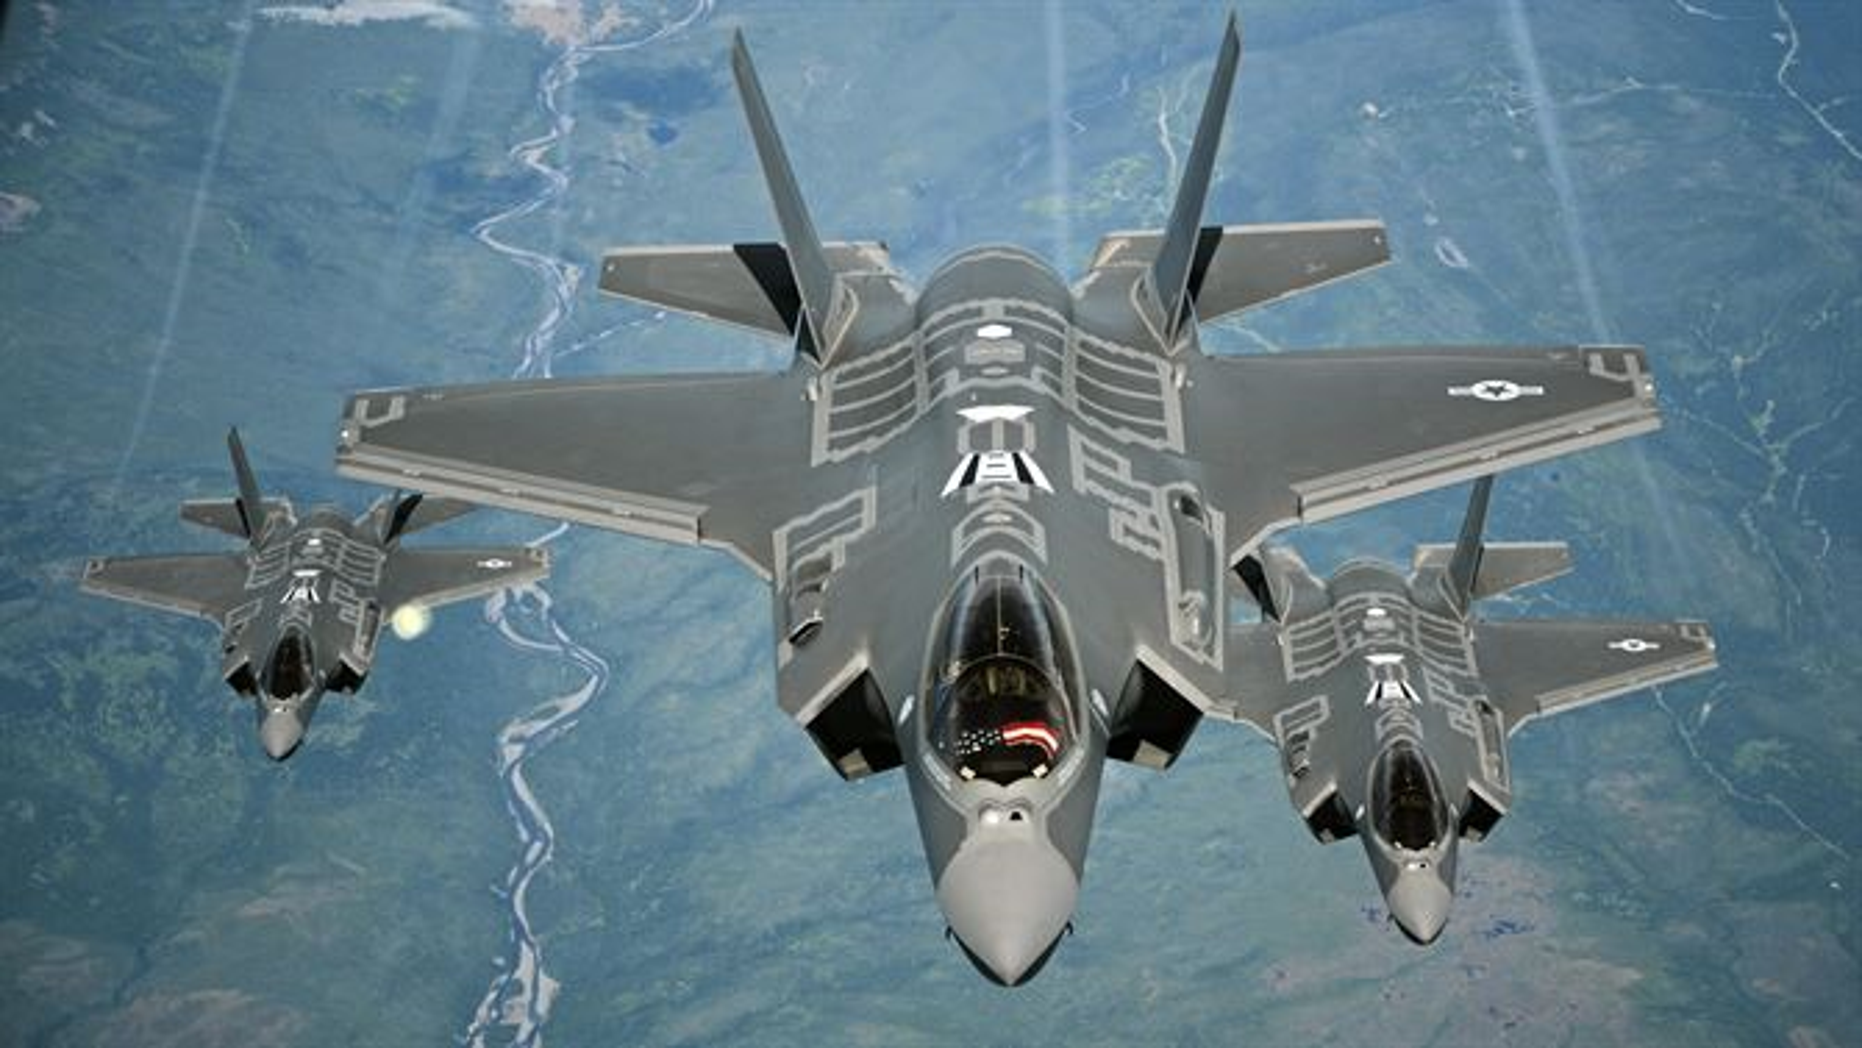 File photo - F-35A Lightning II aircraft receive fuel from a KC-10 Extender from Travis Air Force Base, Calif., July 13, 2015, during a flight from England to the U.S.